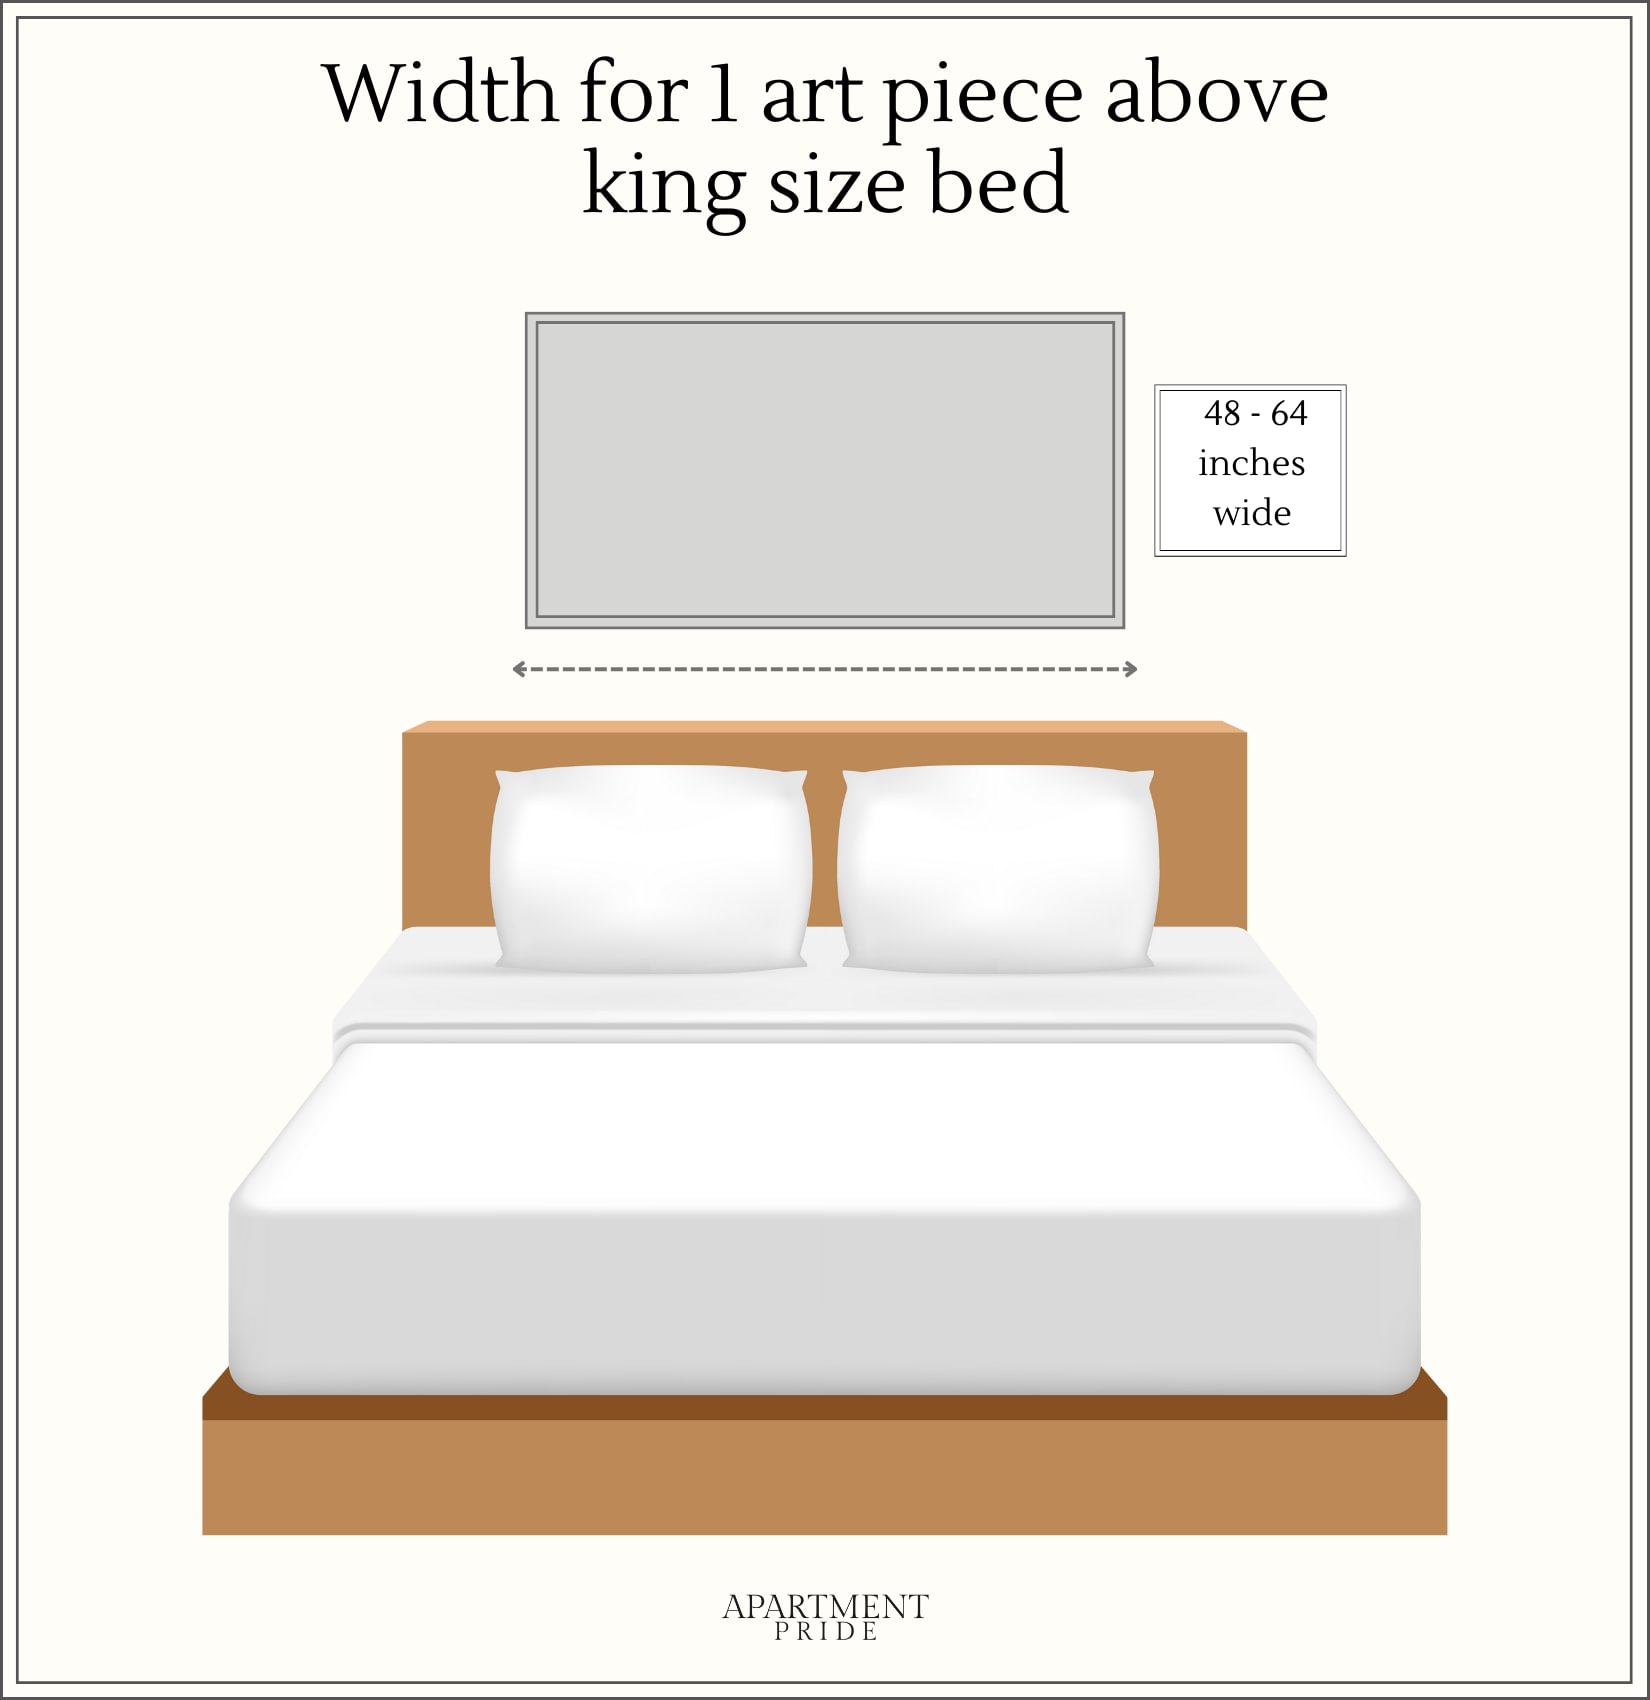 Width measurements for 1 piece of art above king bed